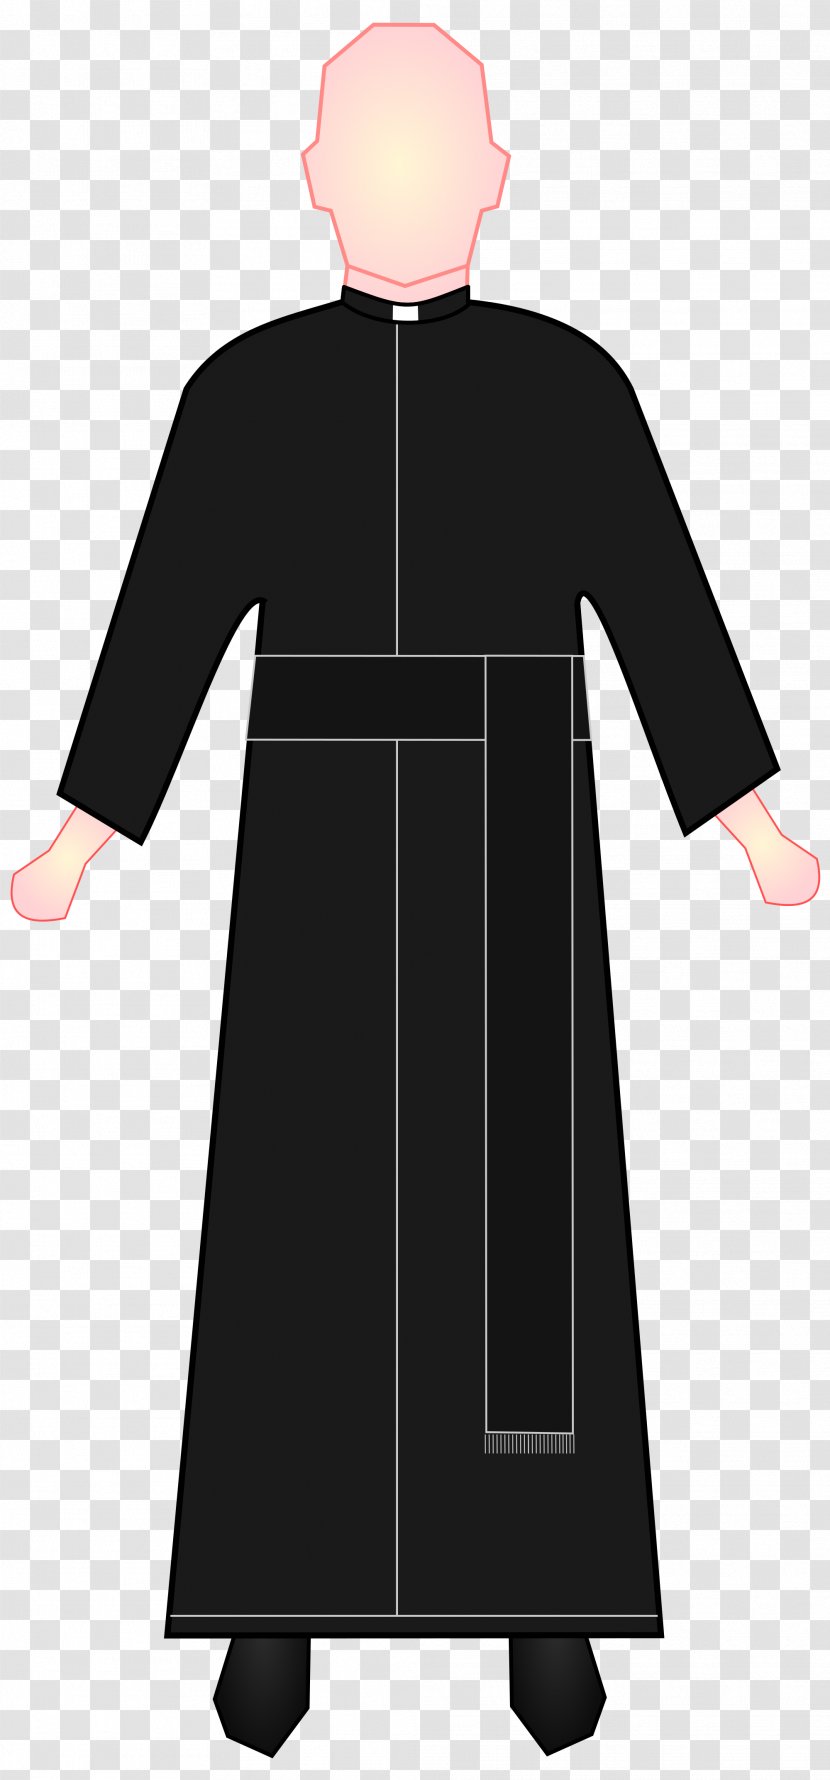 Cassock Prelate Bishop Priest Clergy - Wikipedia Transparent PNG